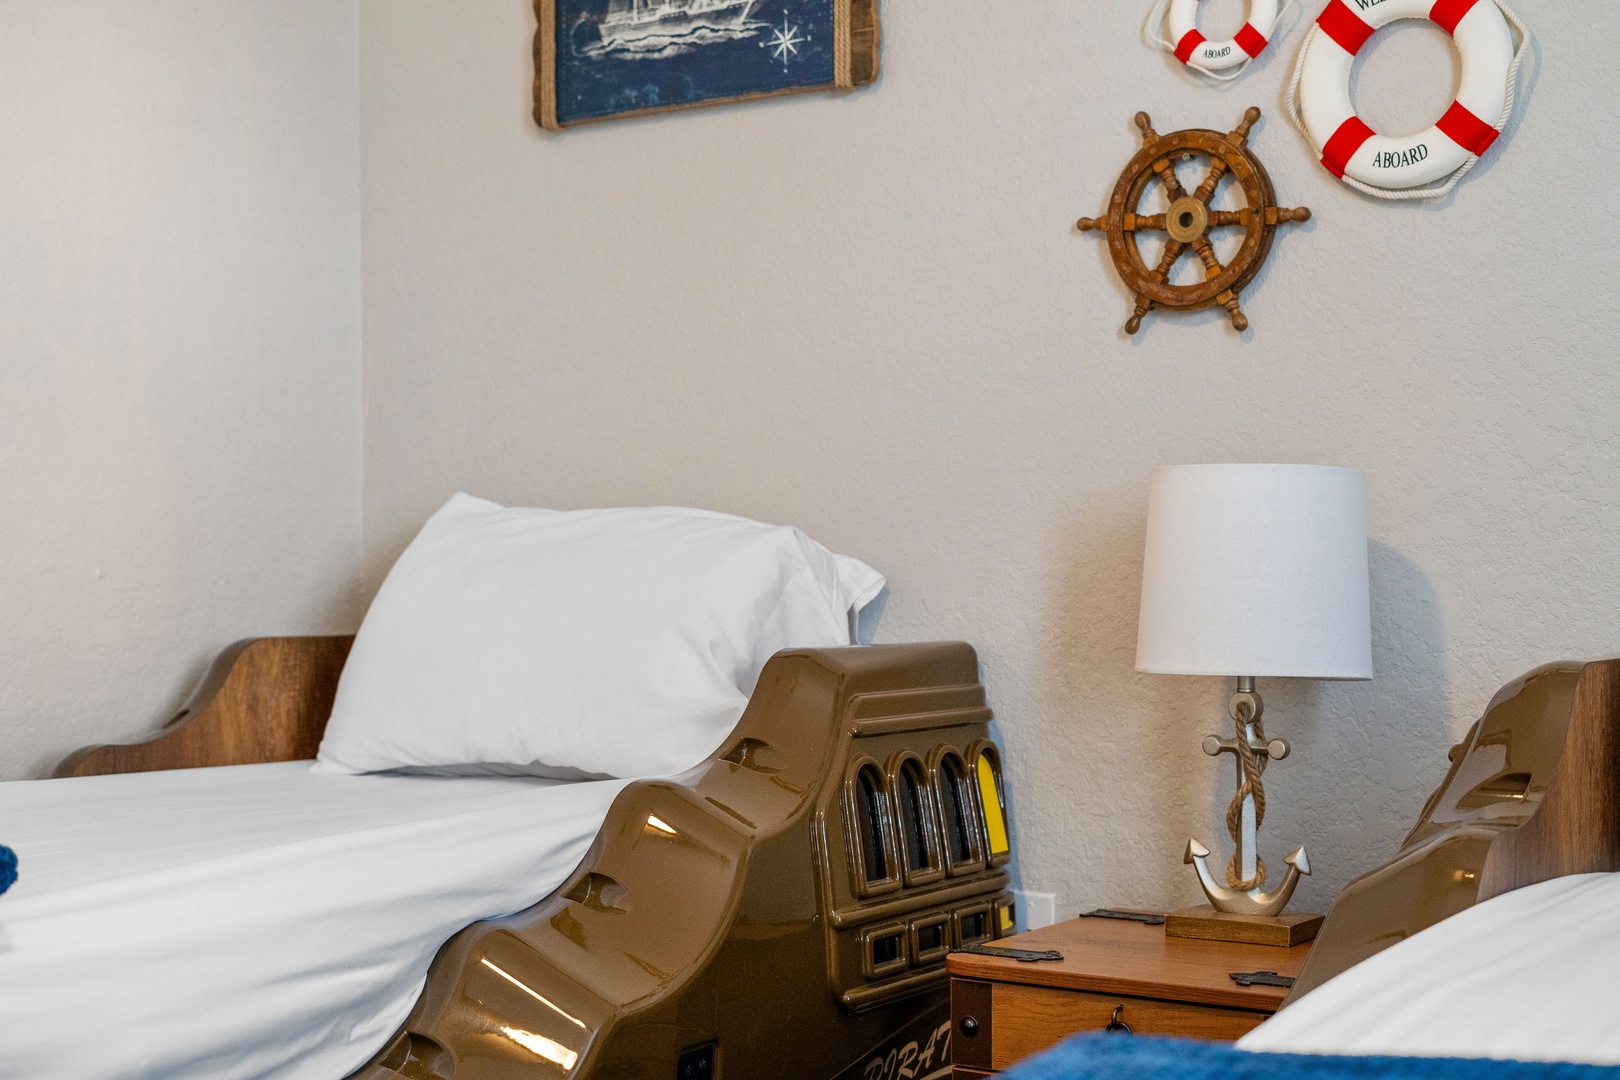 This 2nd floor bedroom offers a pair of nautical twin beds & TV